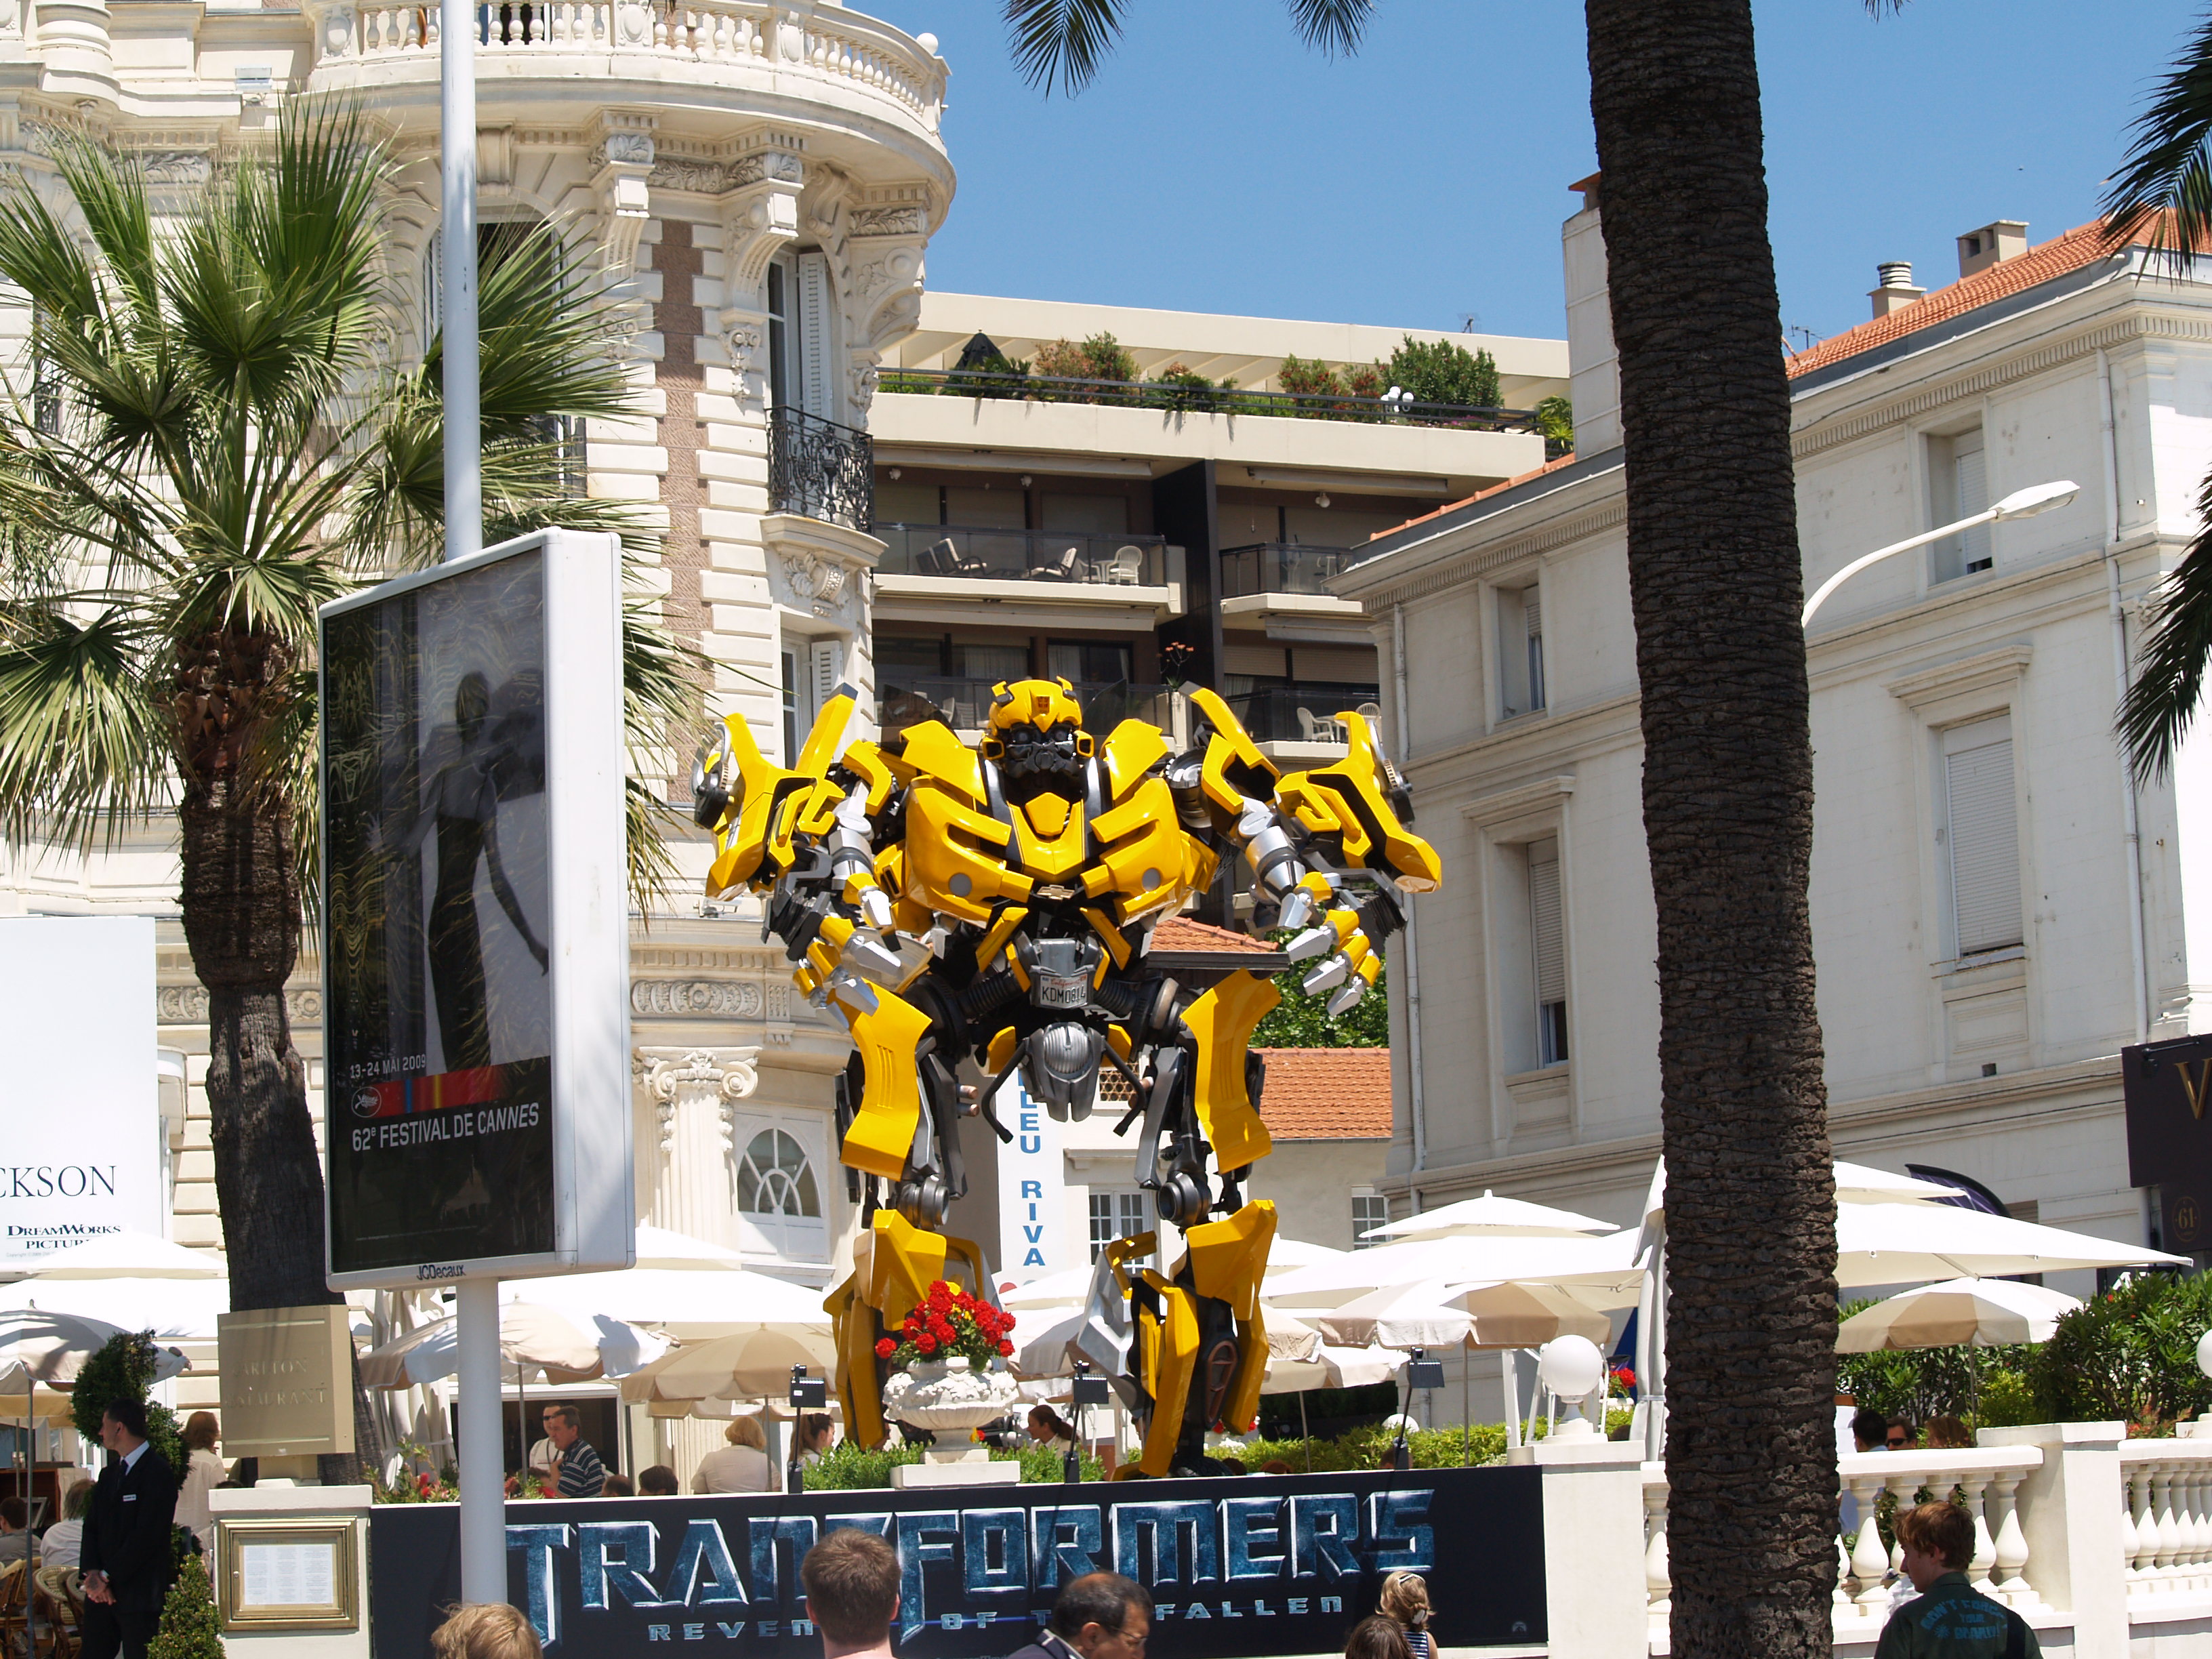 Larger than Life 'Bumble Bee ' in front of the Carlton. :)